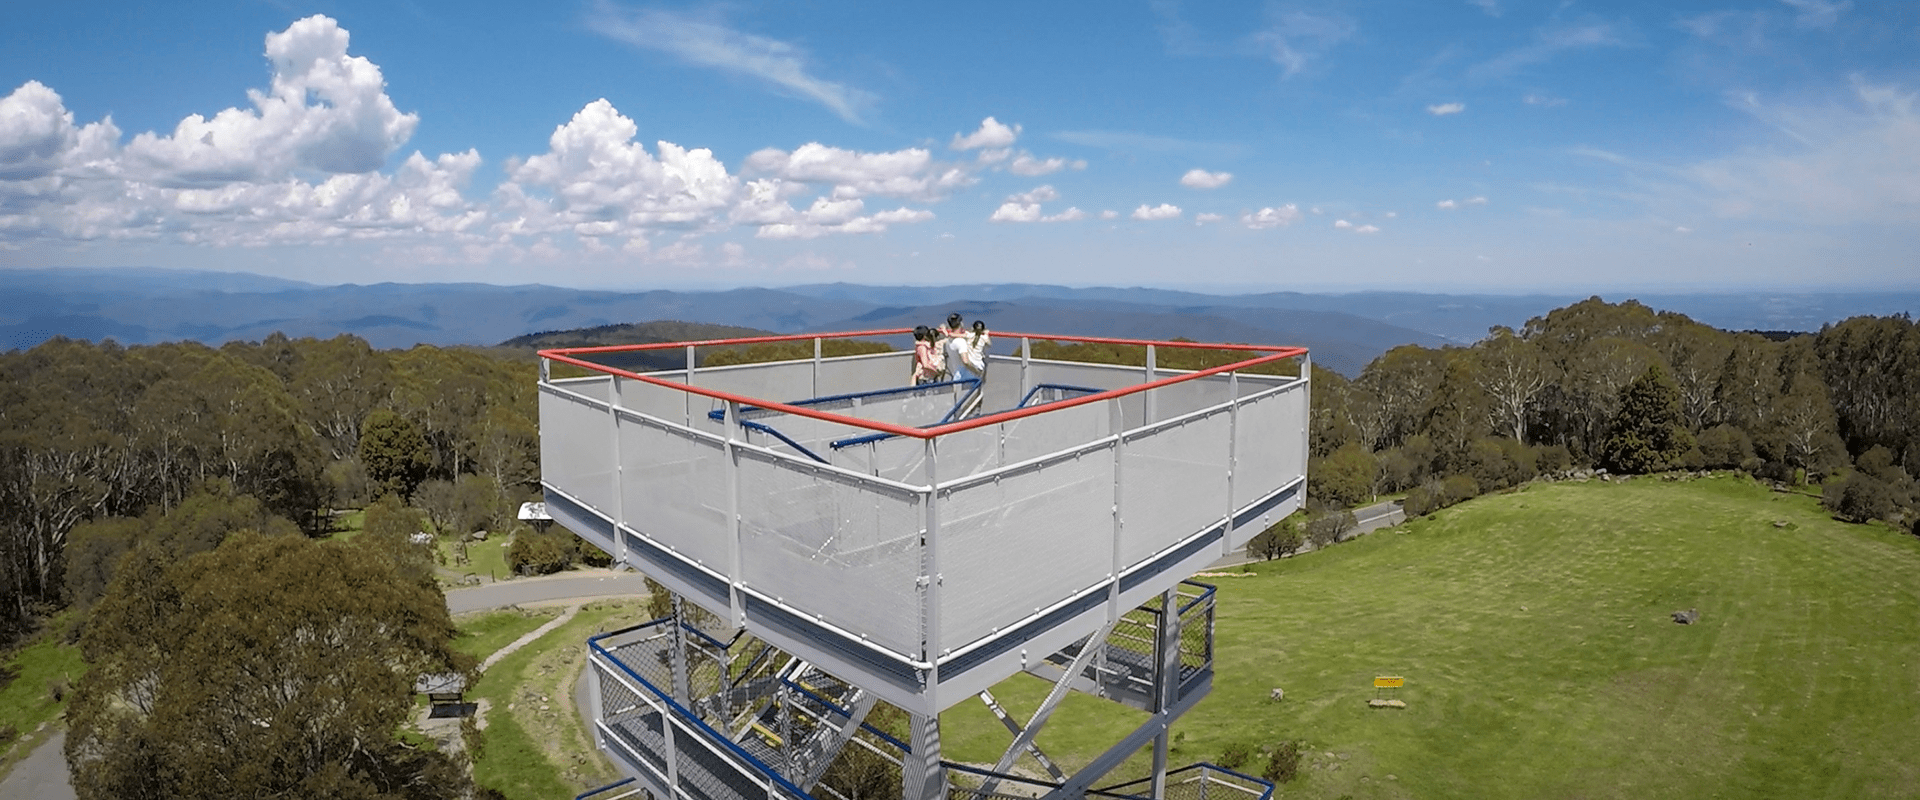 A family looks out from the Mount Donna Buang tower looking out towards endless forested mountain range.